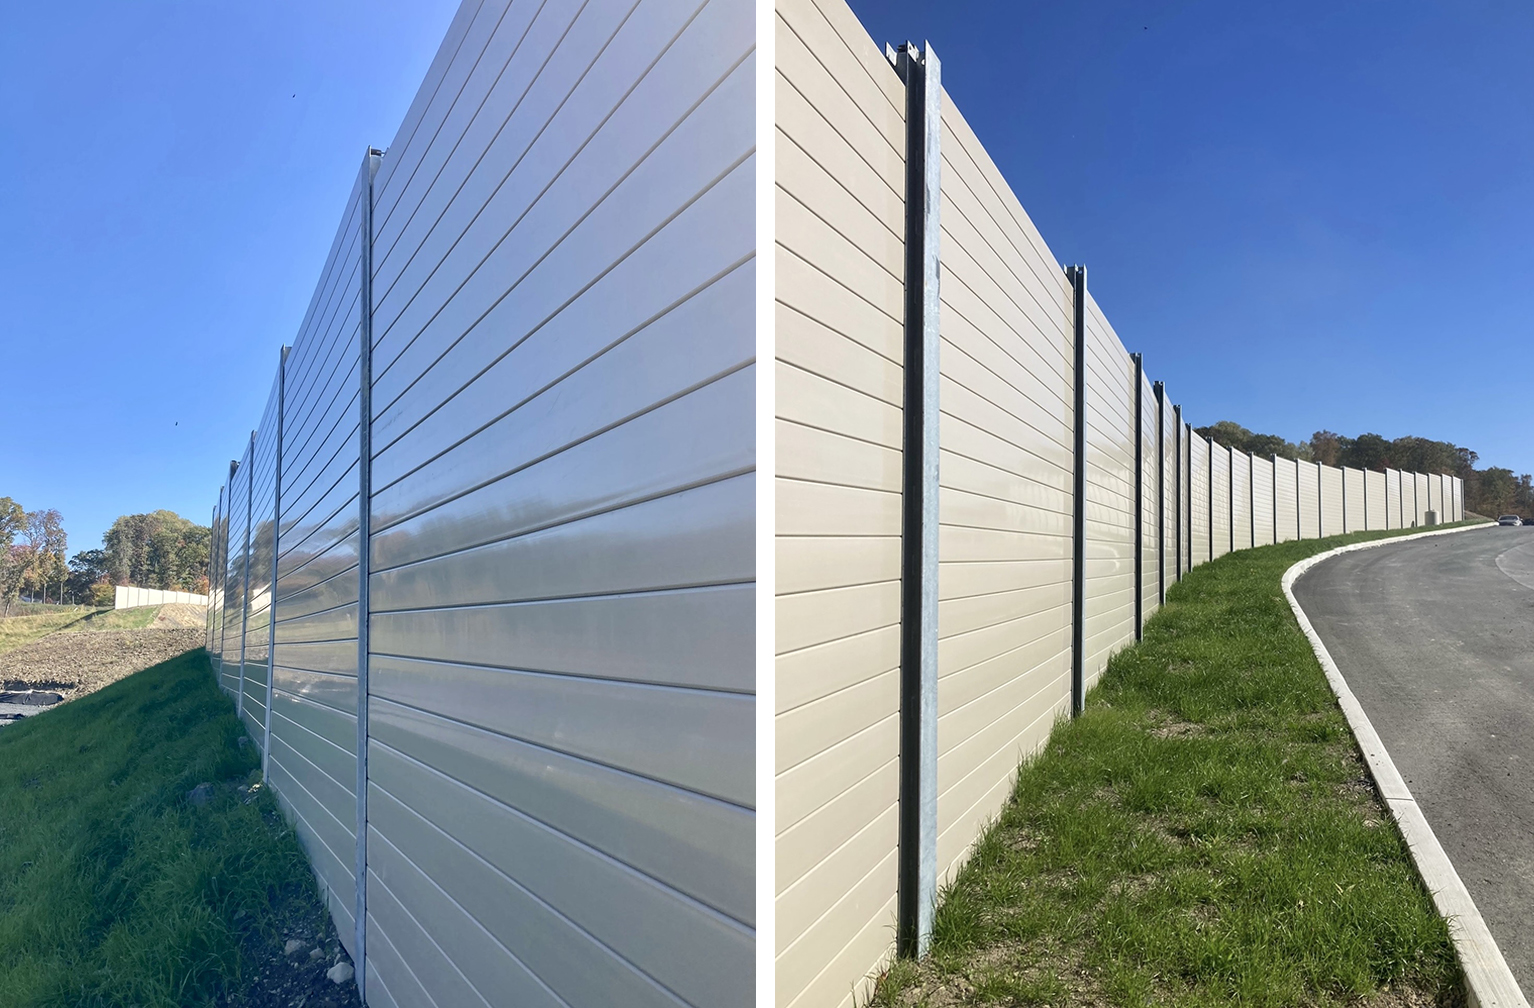 Close-angled views of logistics center noise barrier wall